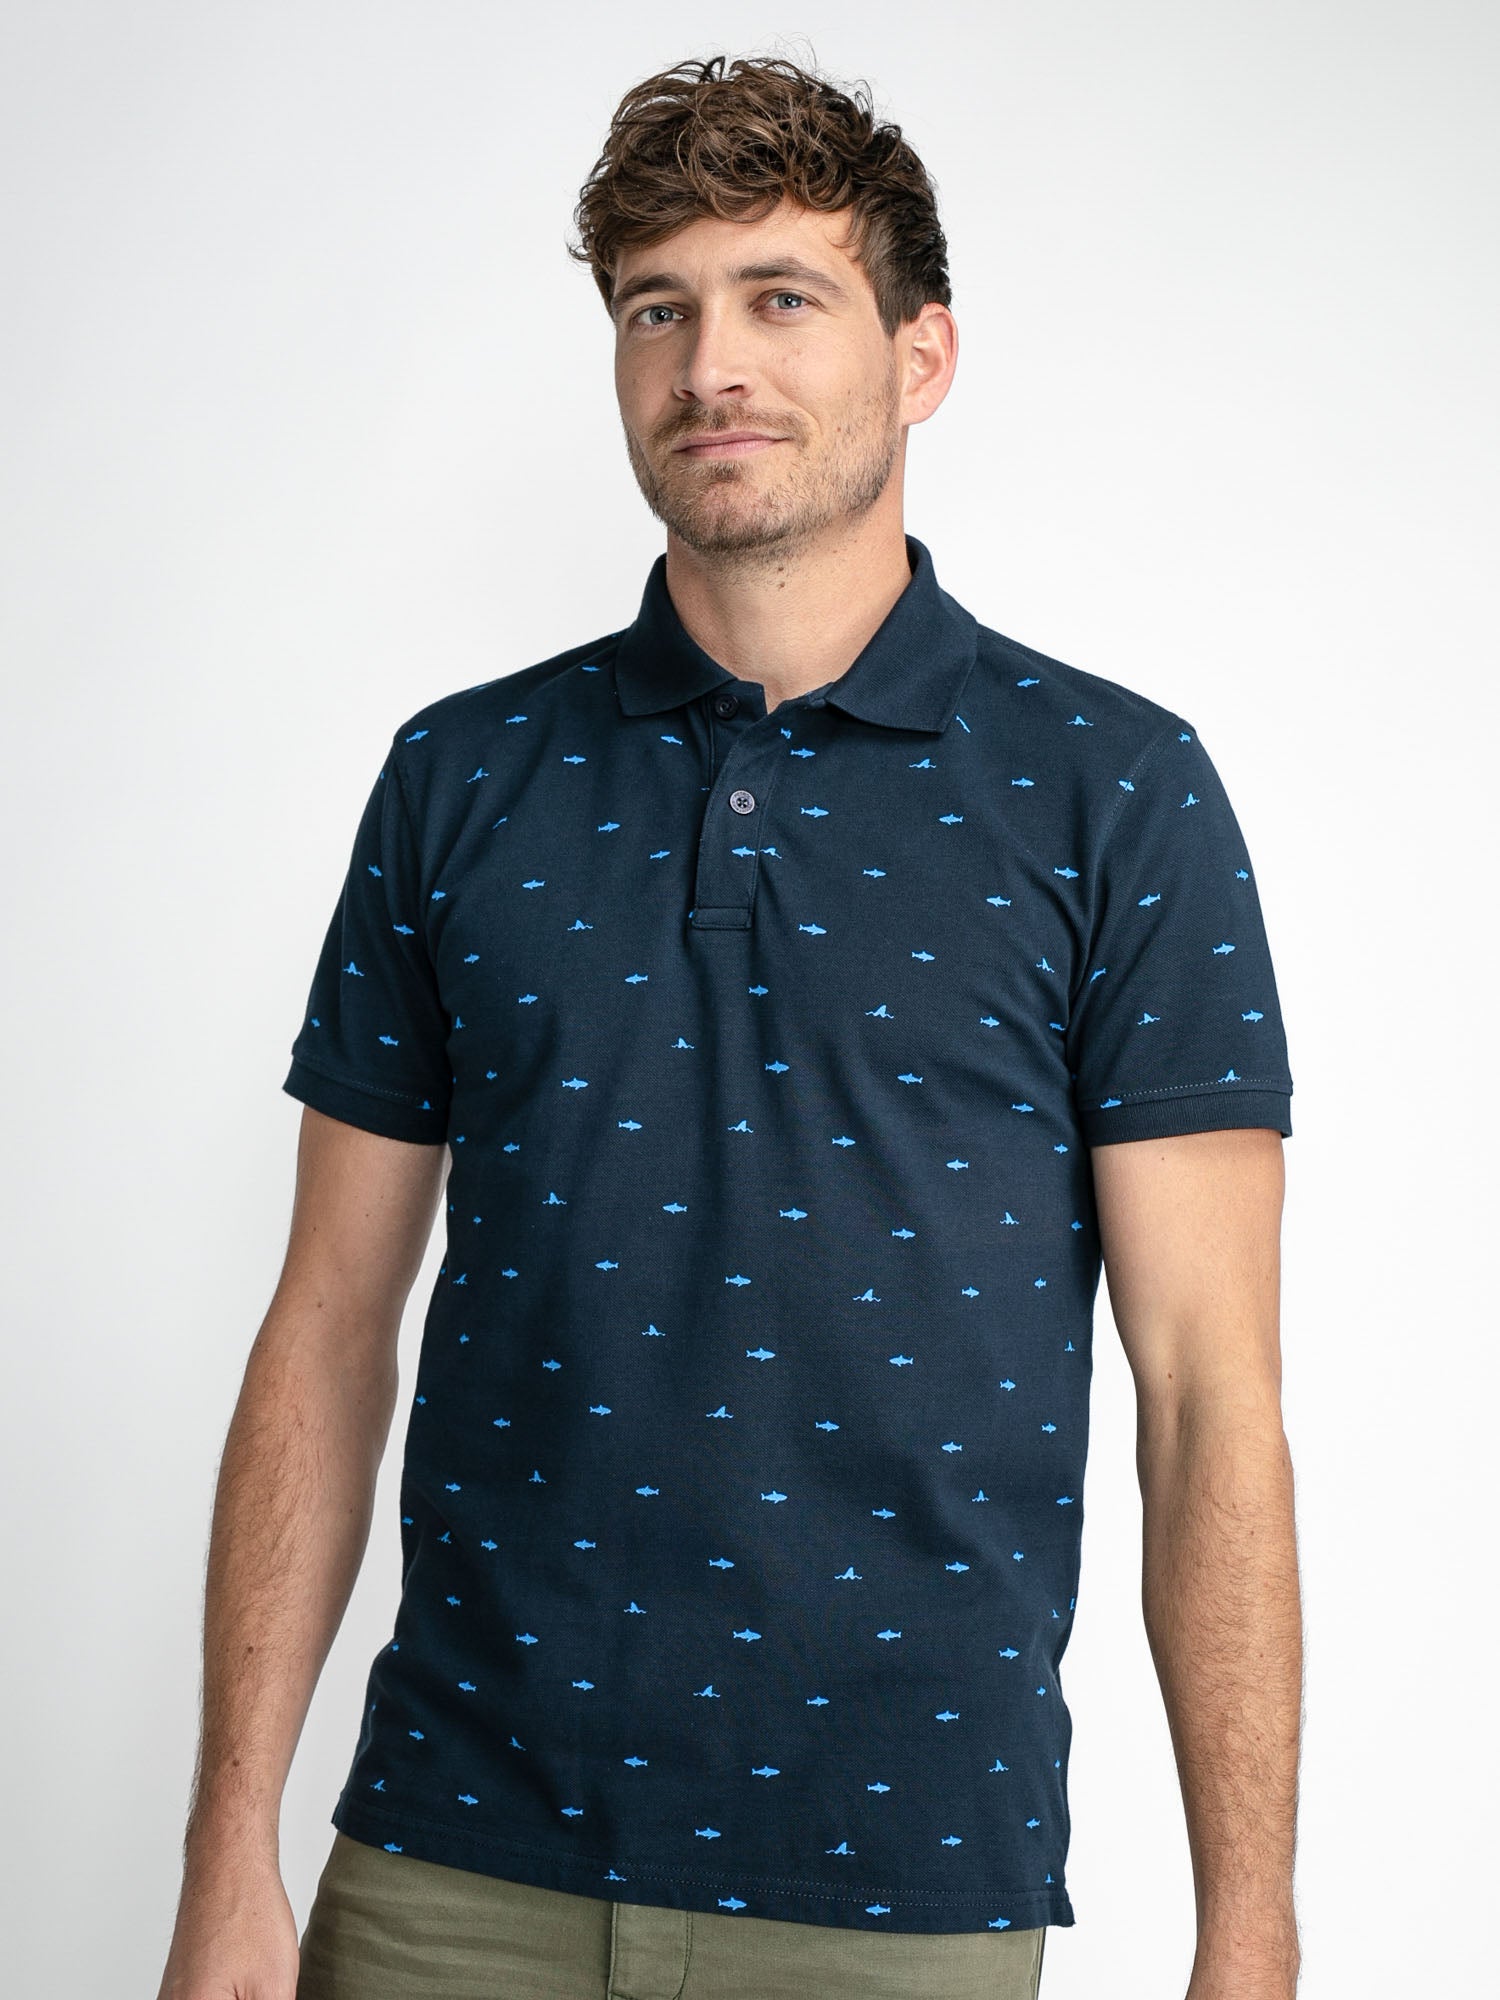 Classic polo Petrol | Official Industries® shirt webshop